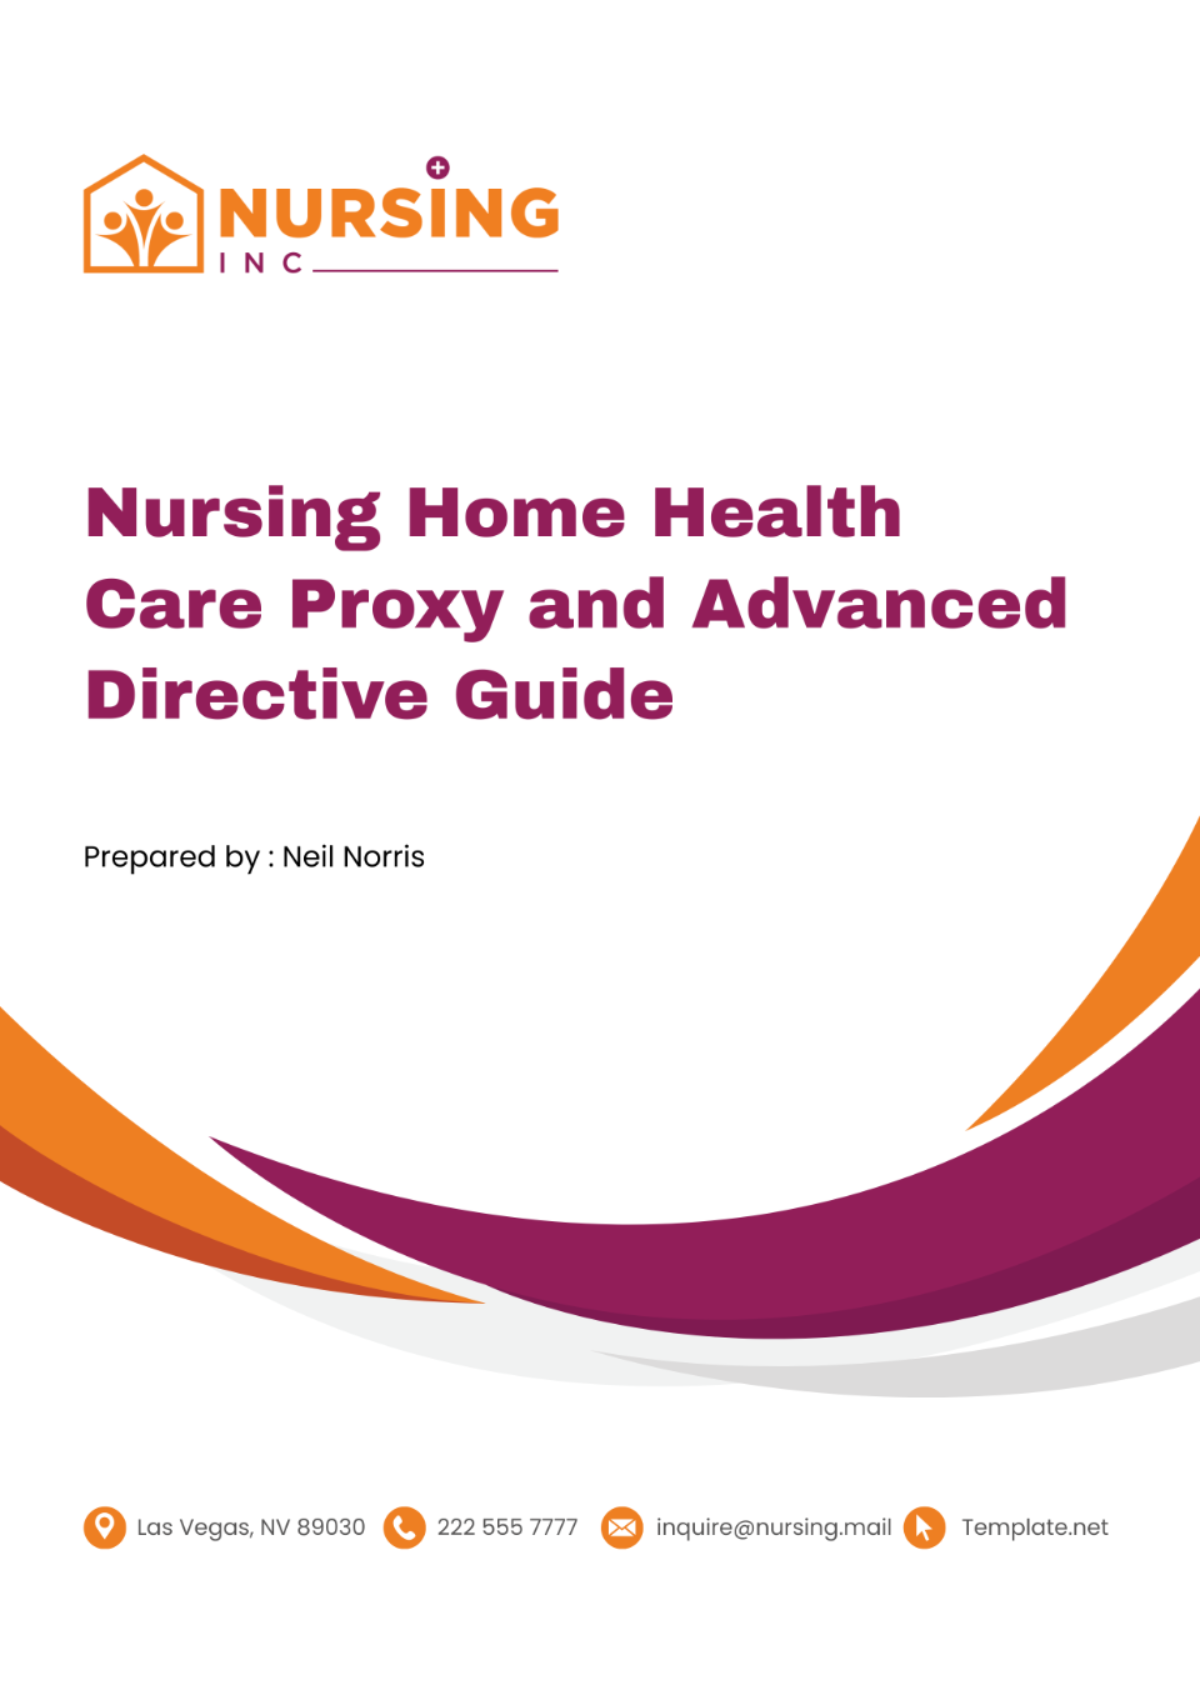 Nursing Home Health Care Proxy and Advanced Directive Guide Template